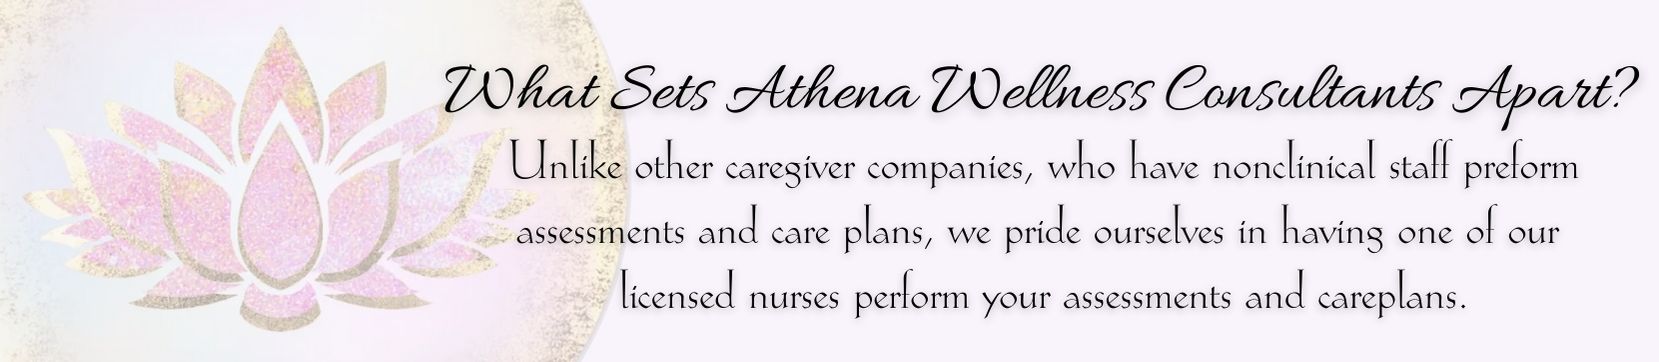 What Sets Athena Wellness Consultants Apart